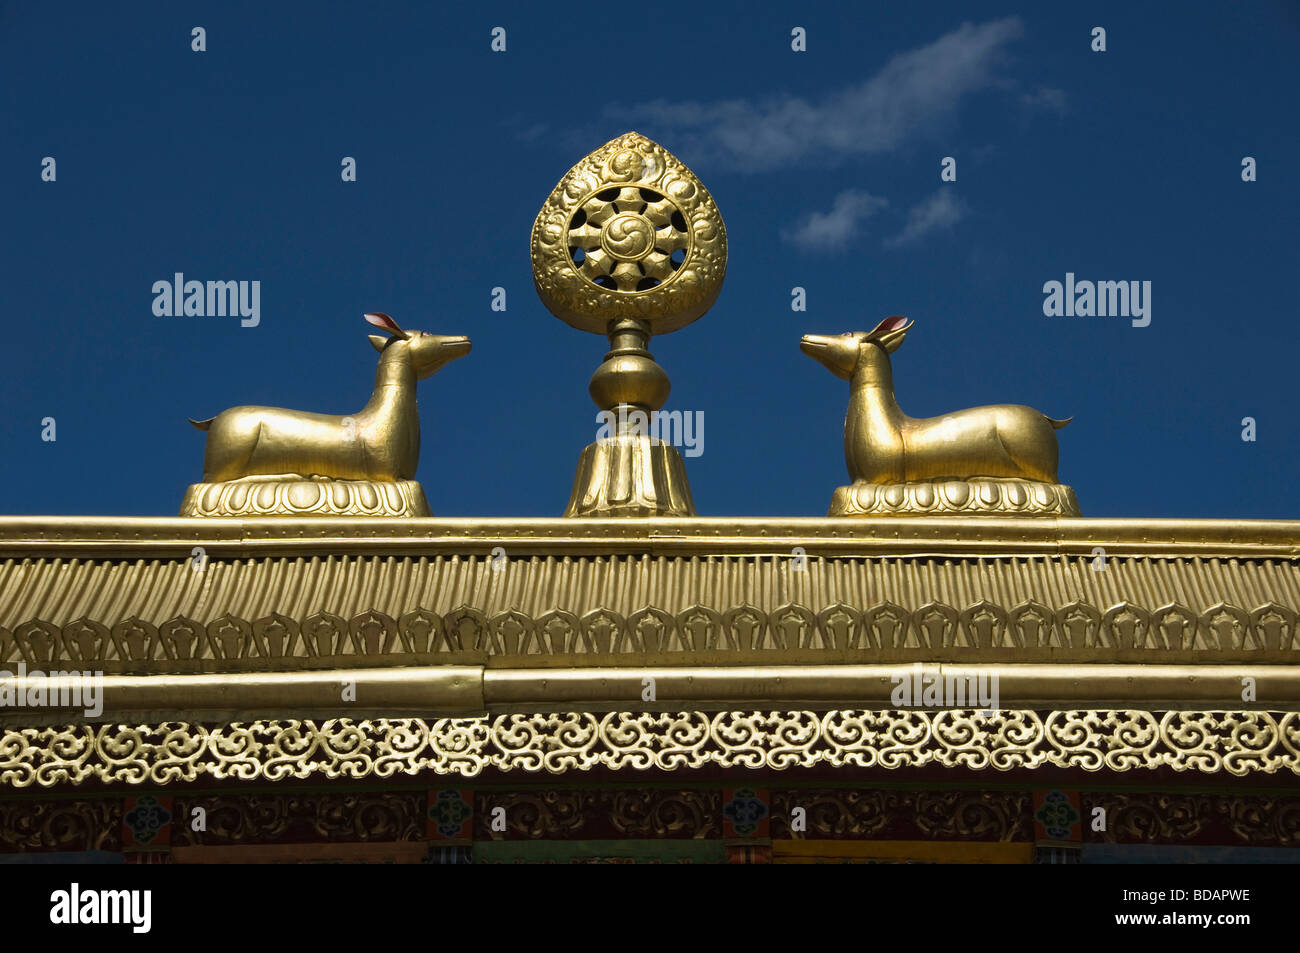 Religious symbols at the top of entrance gate of monestary, Thiksey Monastery, Ladakh, Jammu and Kashmir, India Stock Photo